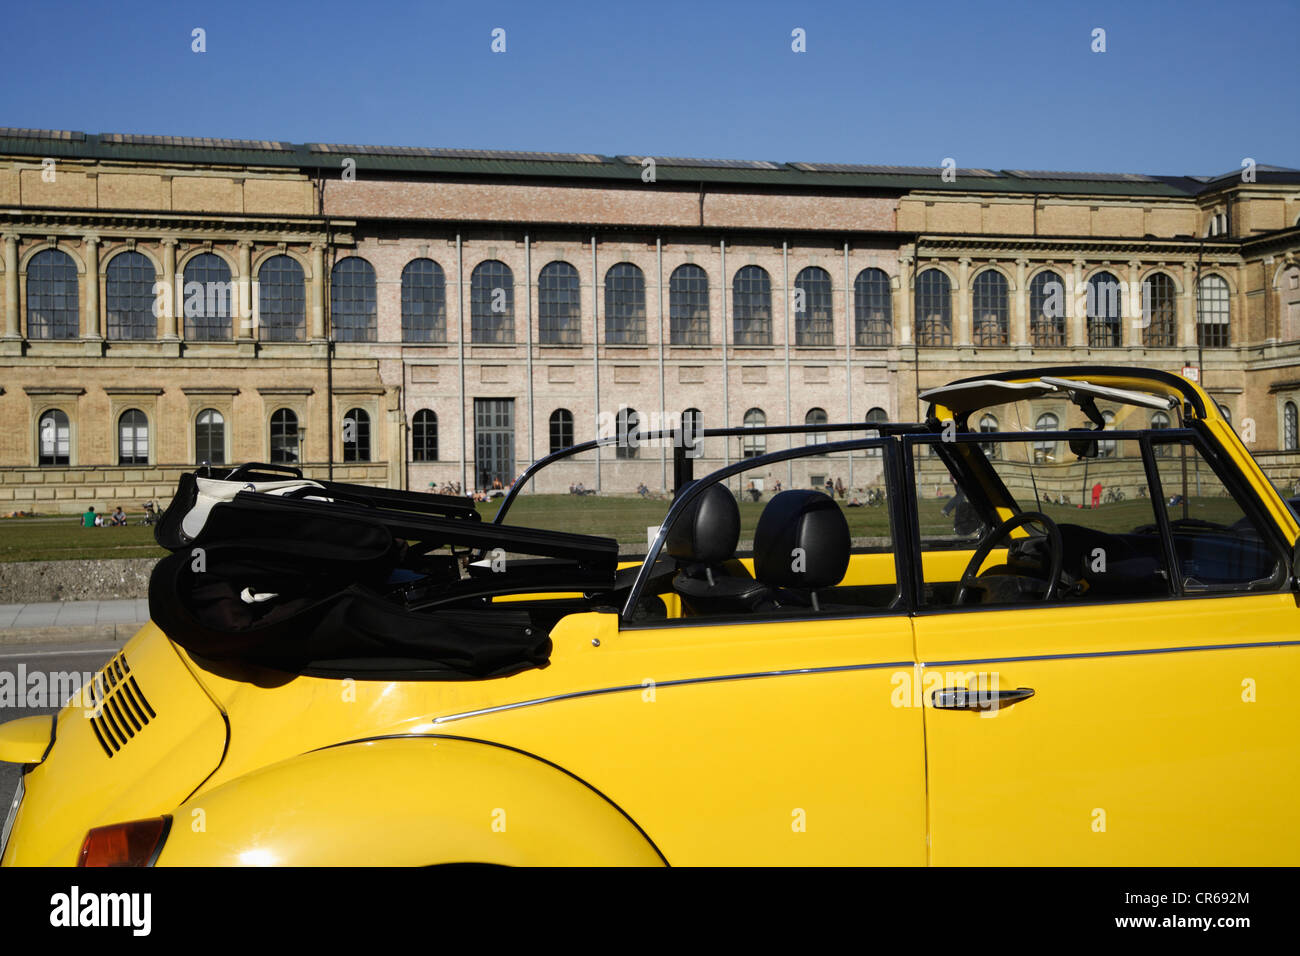 Europe, Germany, Bavaia, Munich, VW beetle cabriolet in front of Alte Pinakothek museum Stock Photo